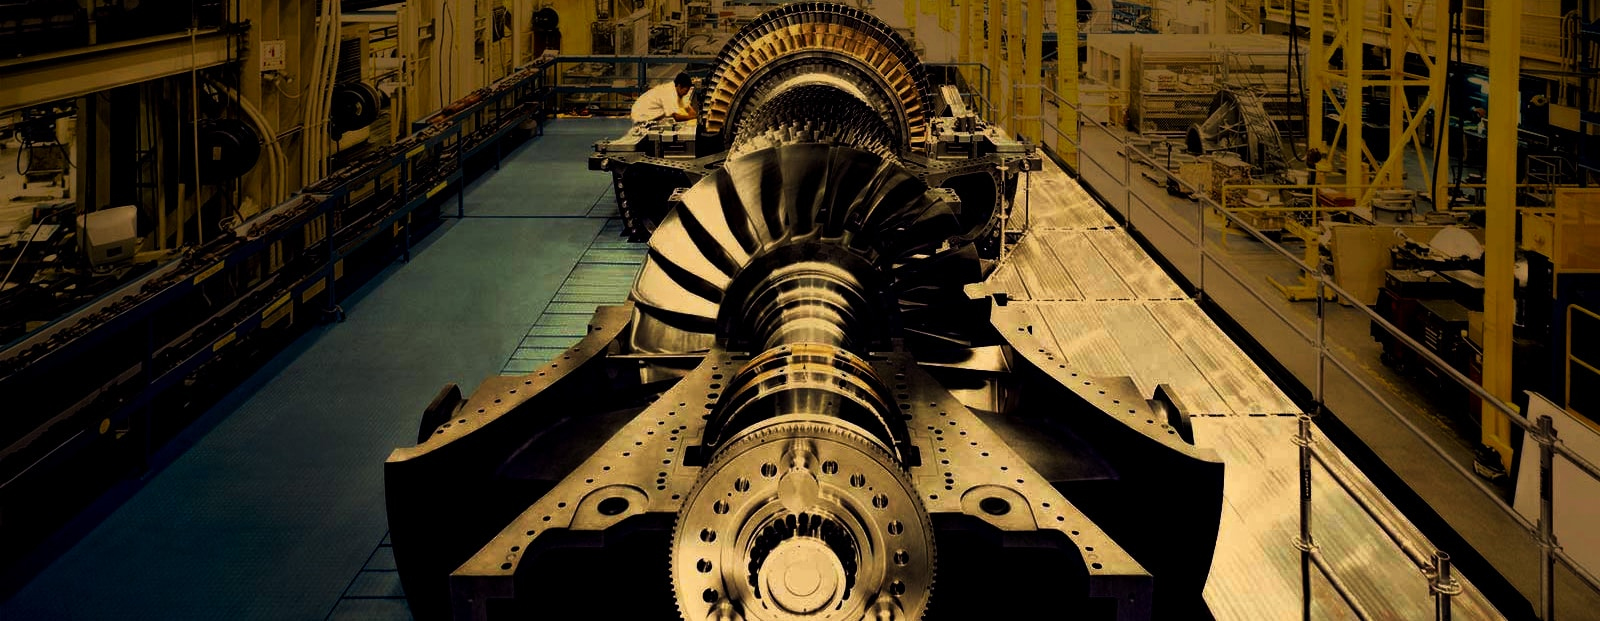 BGGTS - Outstanding Expertise in Gas Turbine Technology Services